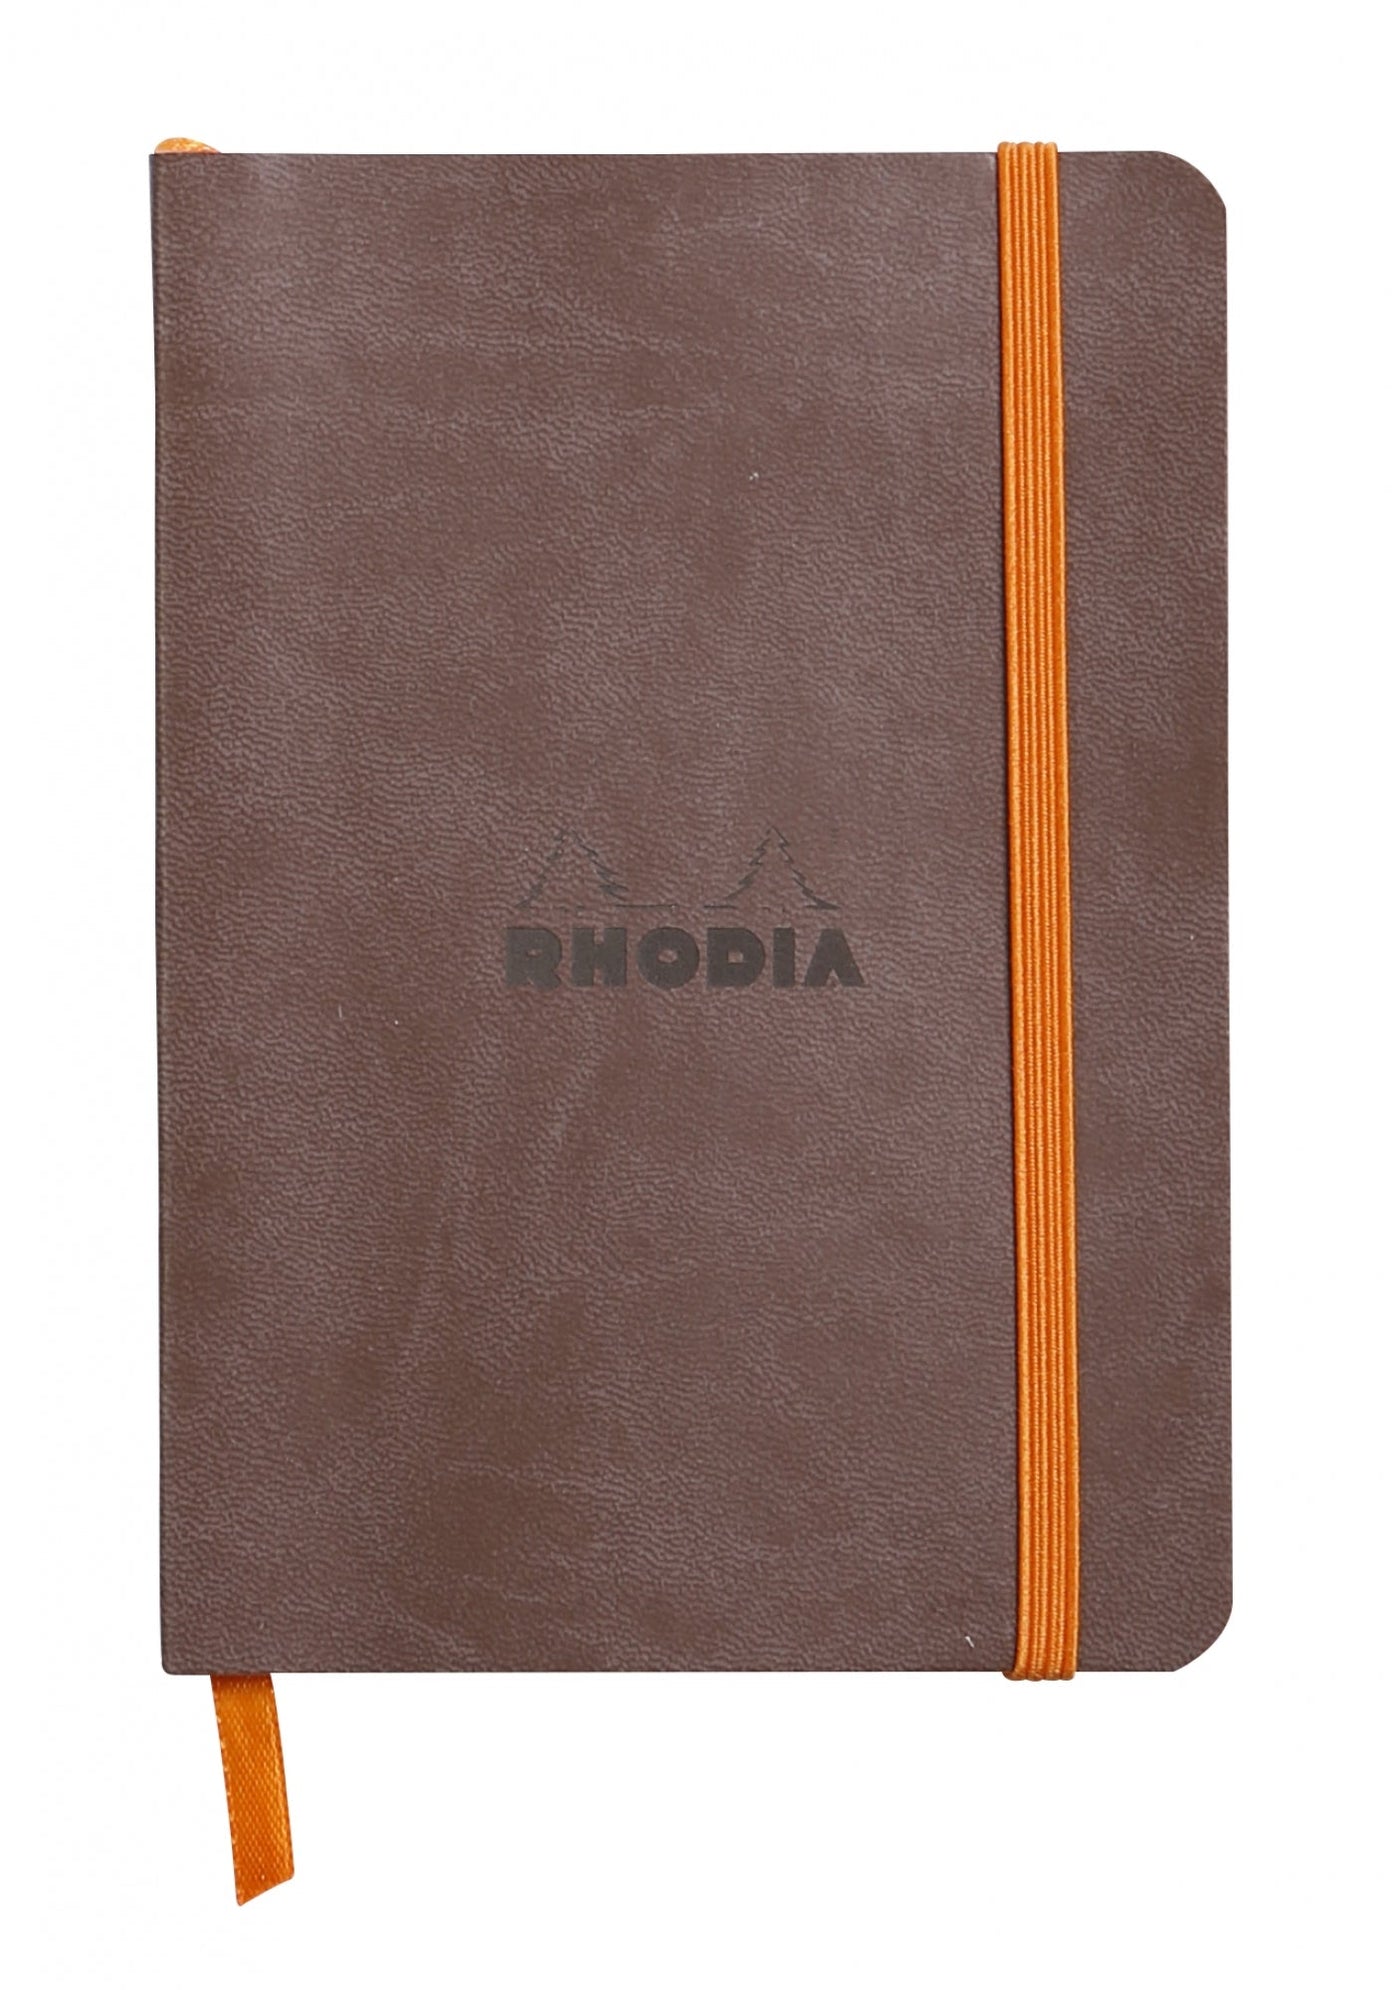 Rhodia Rhodiarama Soft Cover A6 Chocolate Dotted Notebook